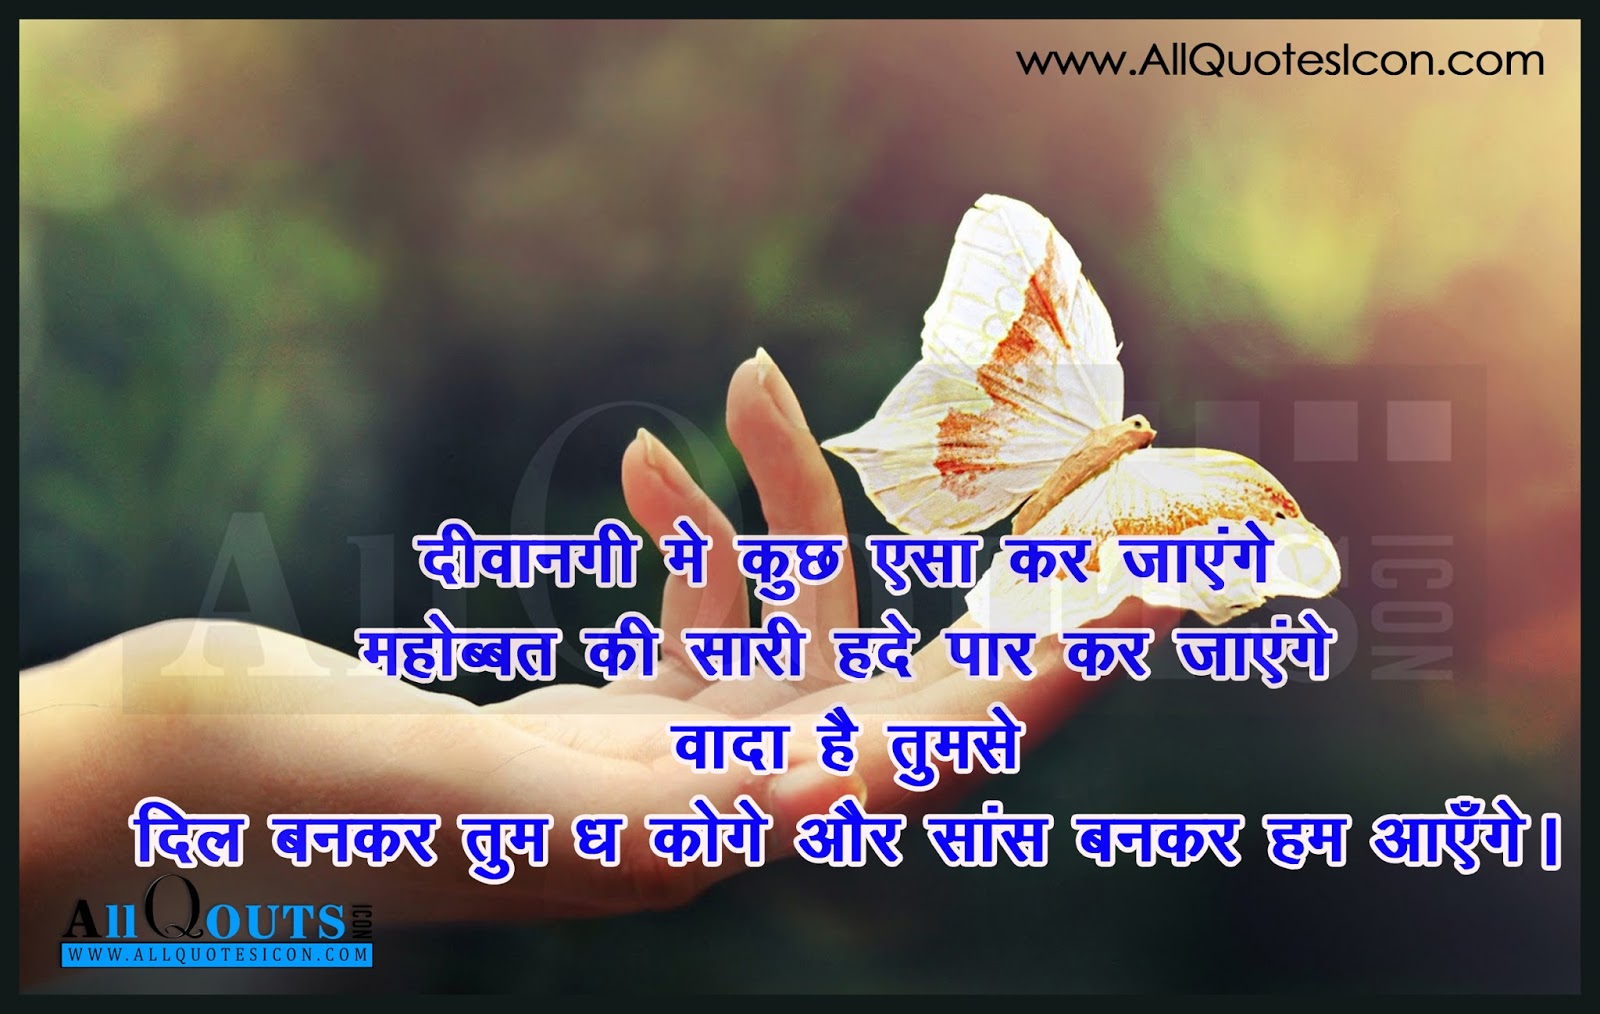 Hindi Love Quotes Motivation Thoughts Sayings